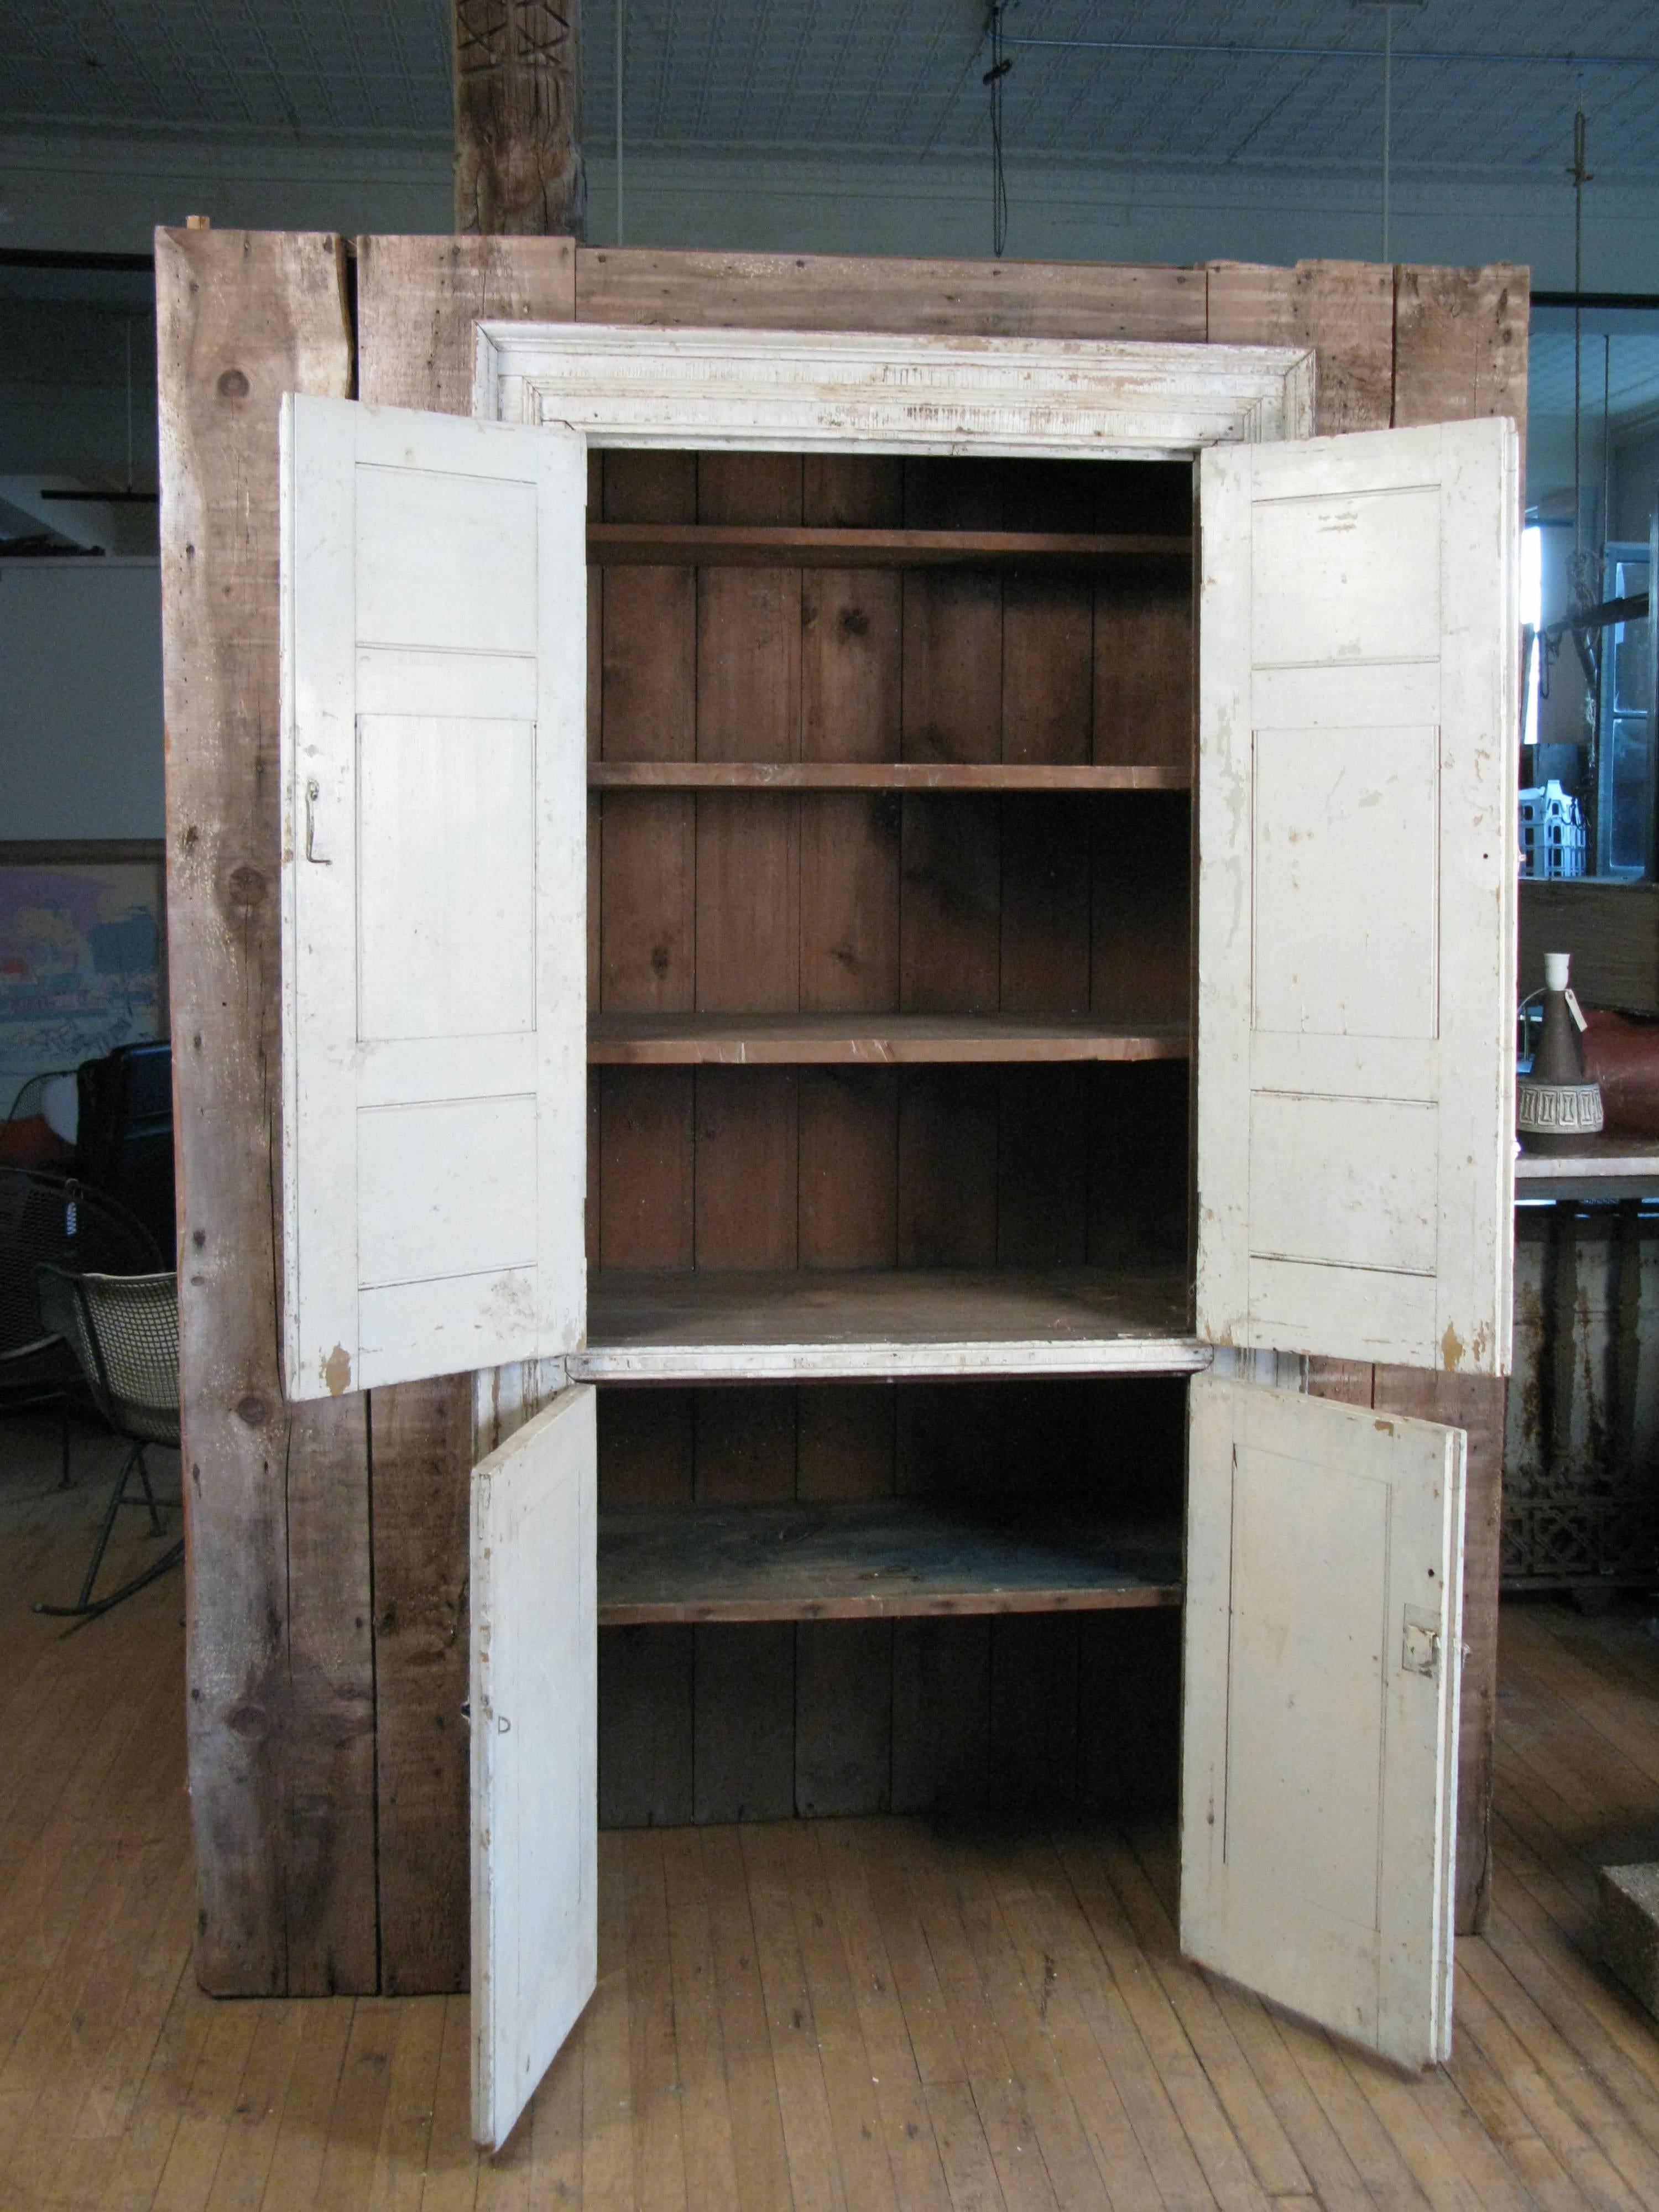 A very unique 19th century Greek Revival wall cupboard, originally built into a Greek revival house. it was carefully removed so the cupboard is intact including the painted doors with molding surround.